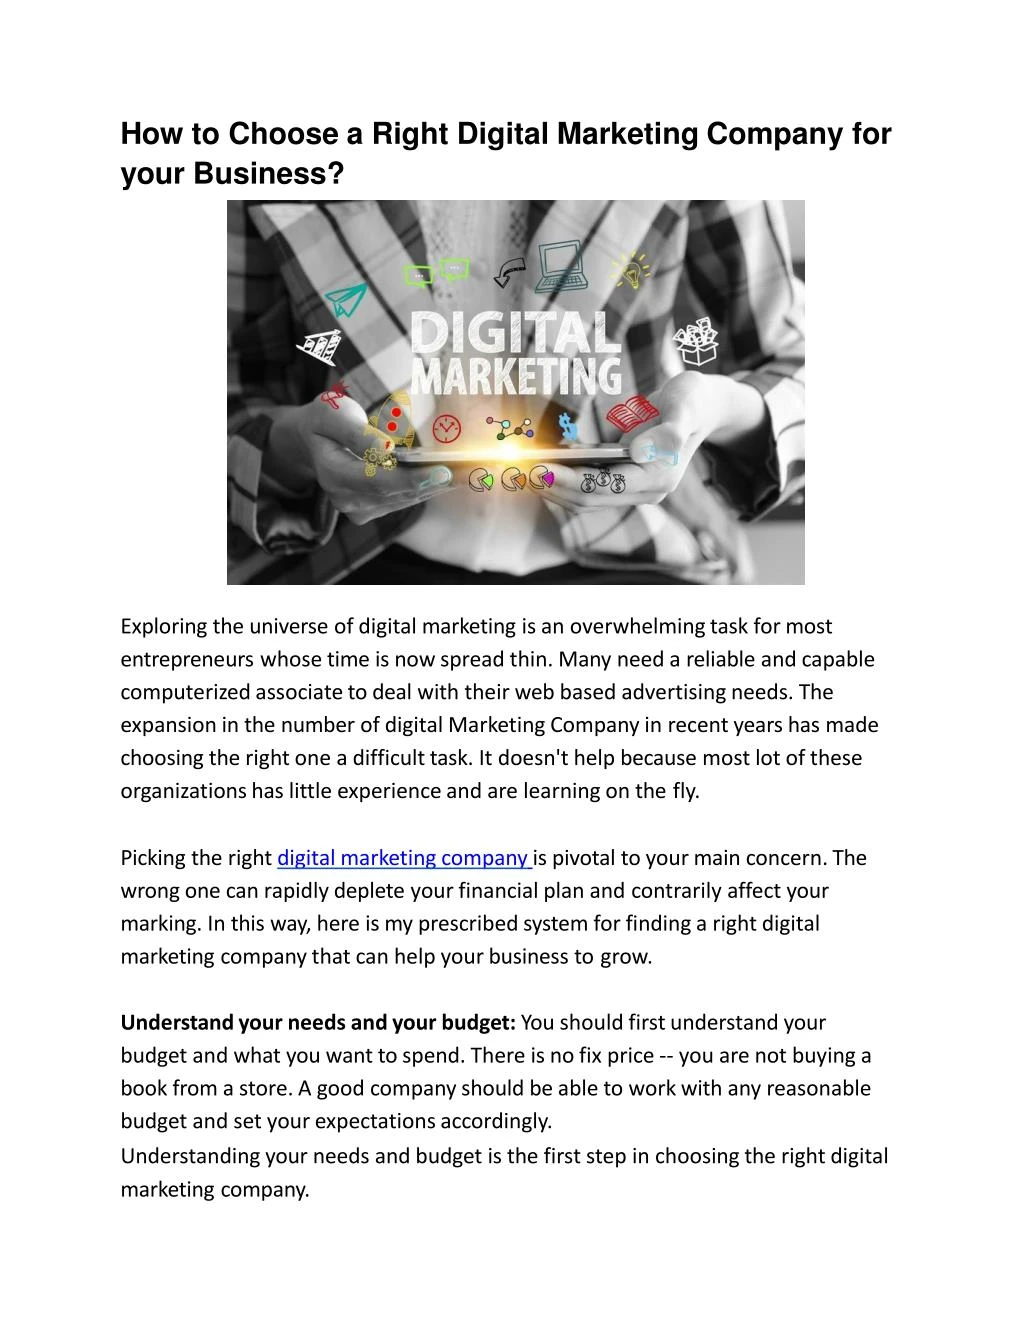 how to choose a right digital marketing company